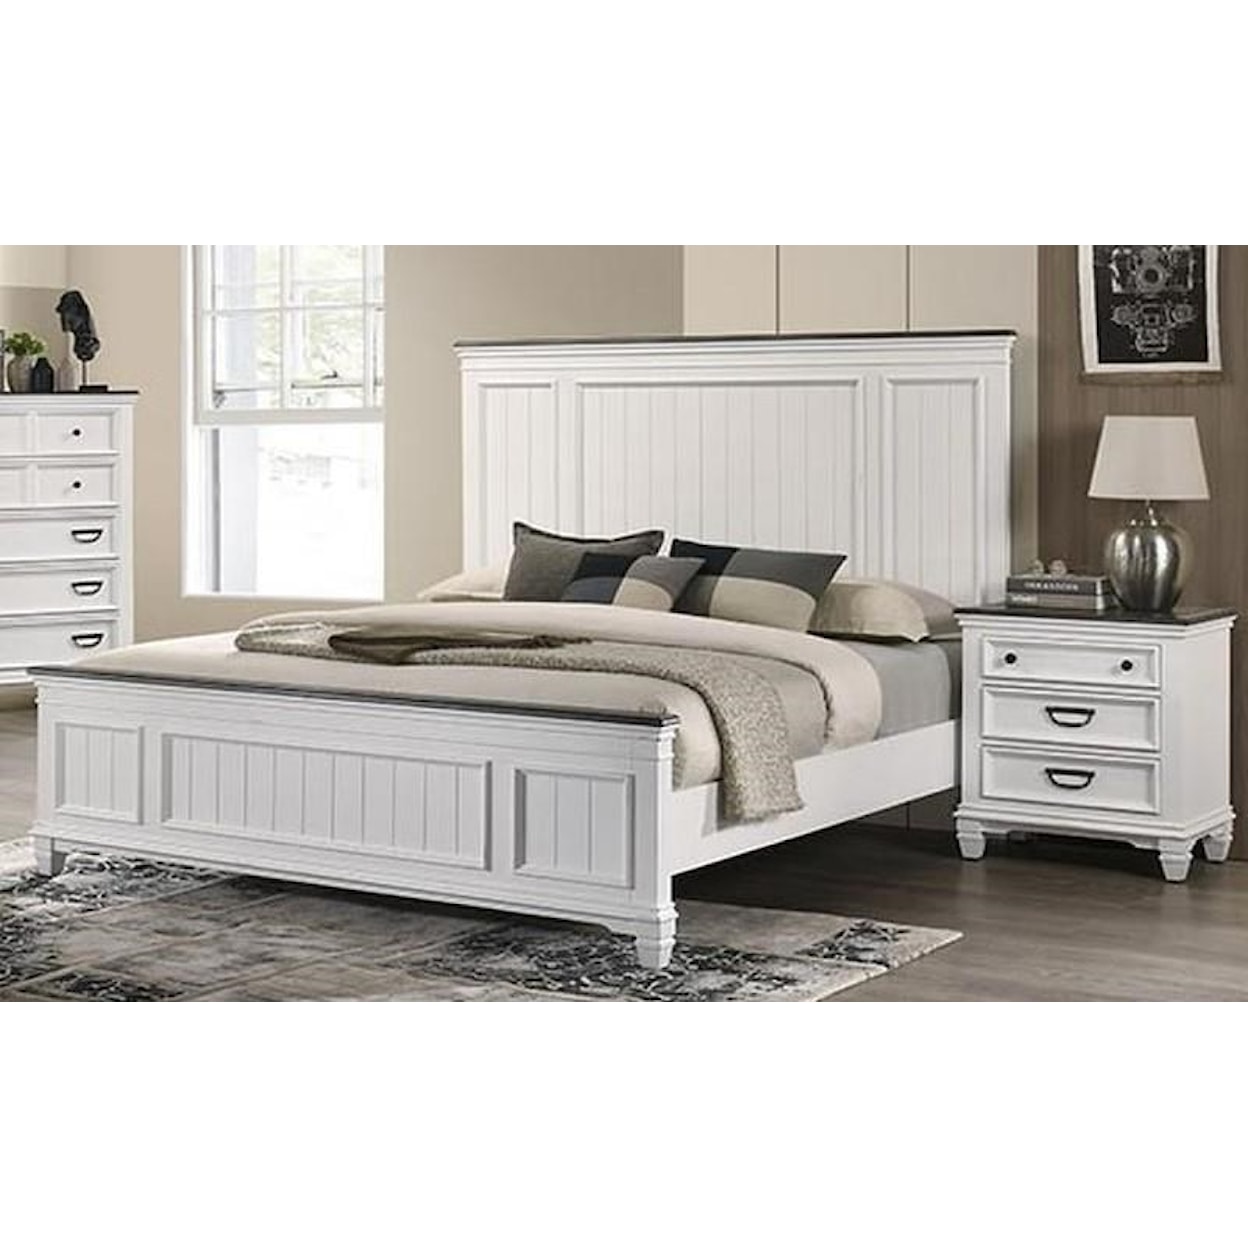 Lifestyle C8309A Full Bed